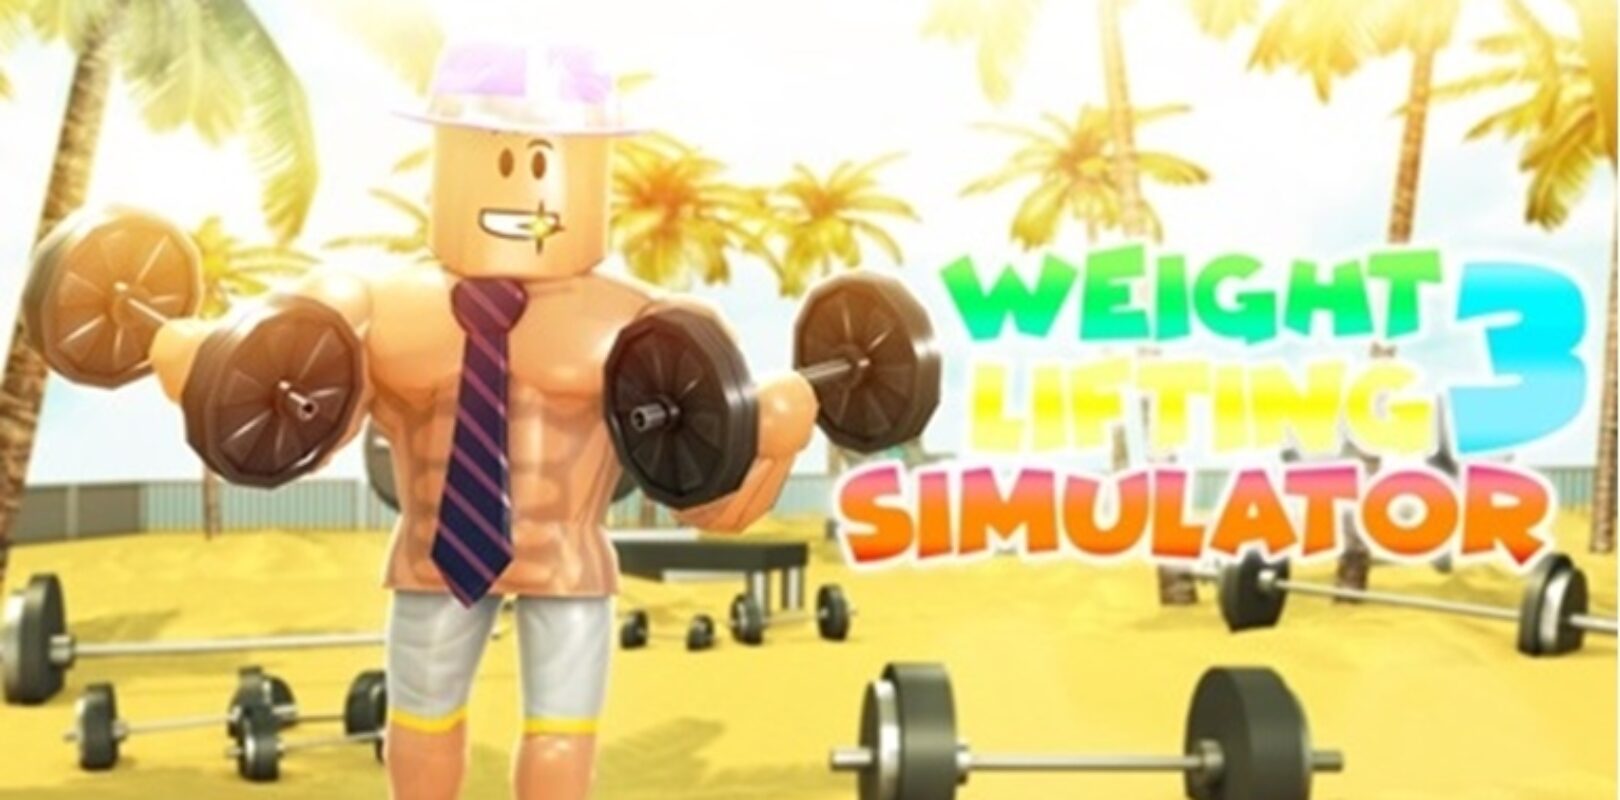 Weight Lifting Simulator 3 Codes 2020 Pivotal Gamers - 4 codes for weight lifting simulator roblox youtube